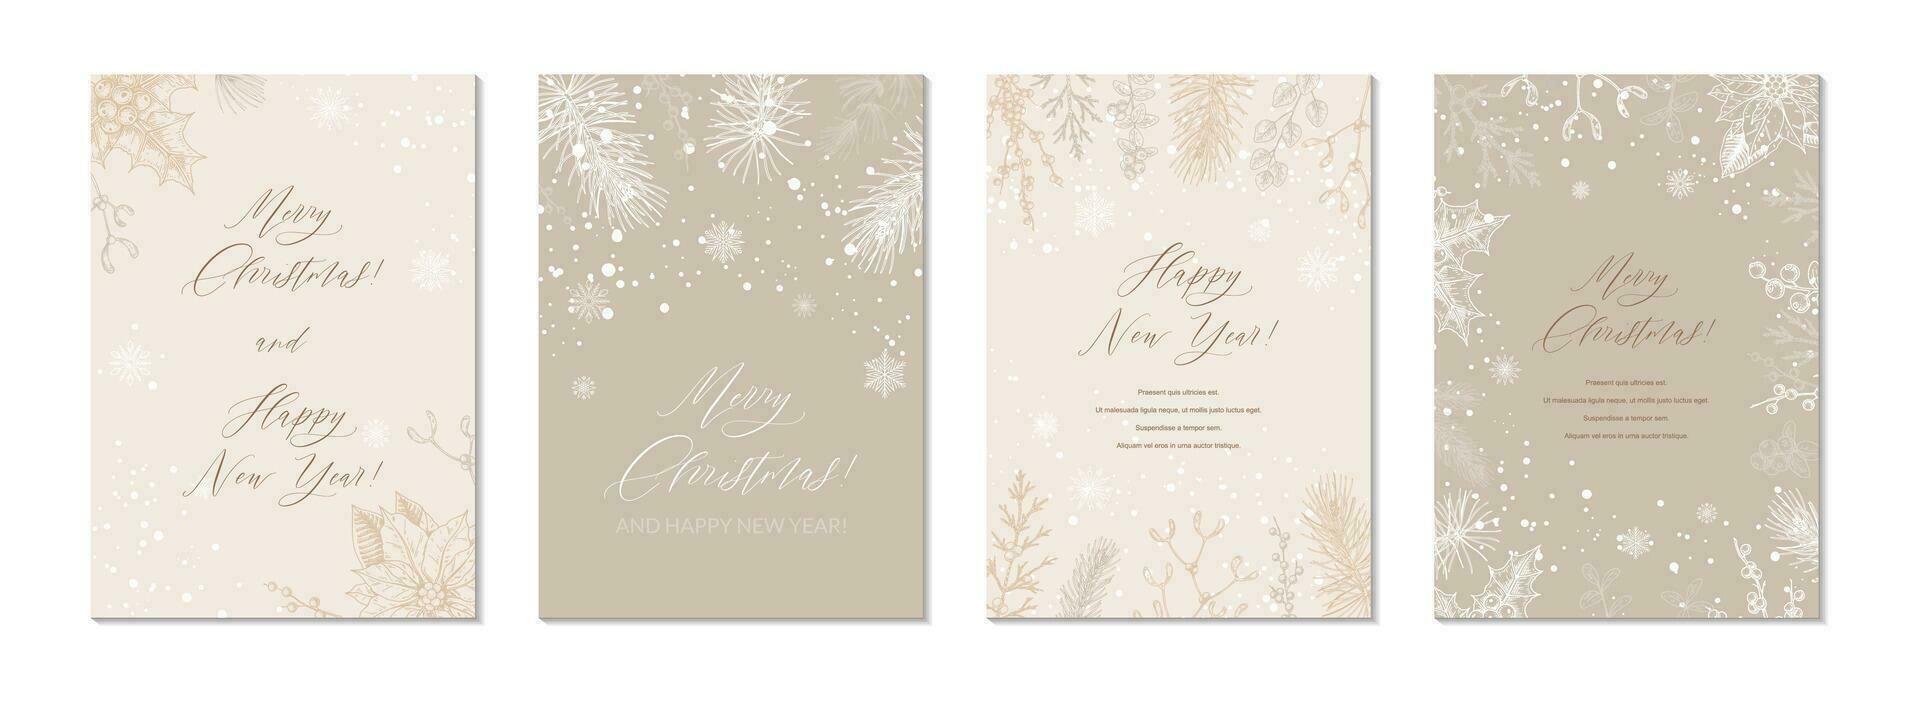 Merry Christmas and Happy New year greeting cards set. Hand drawn sketch winter postcard. Trendy holiday festive design background for invitations, certificate, social media templates vector